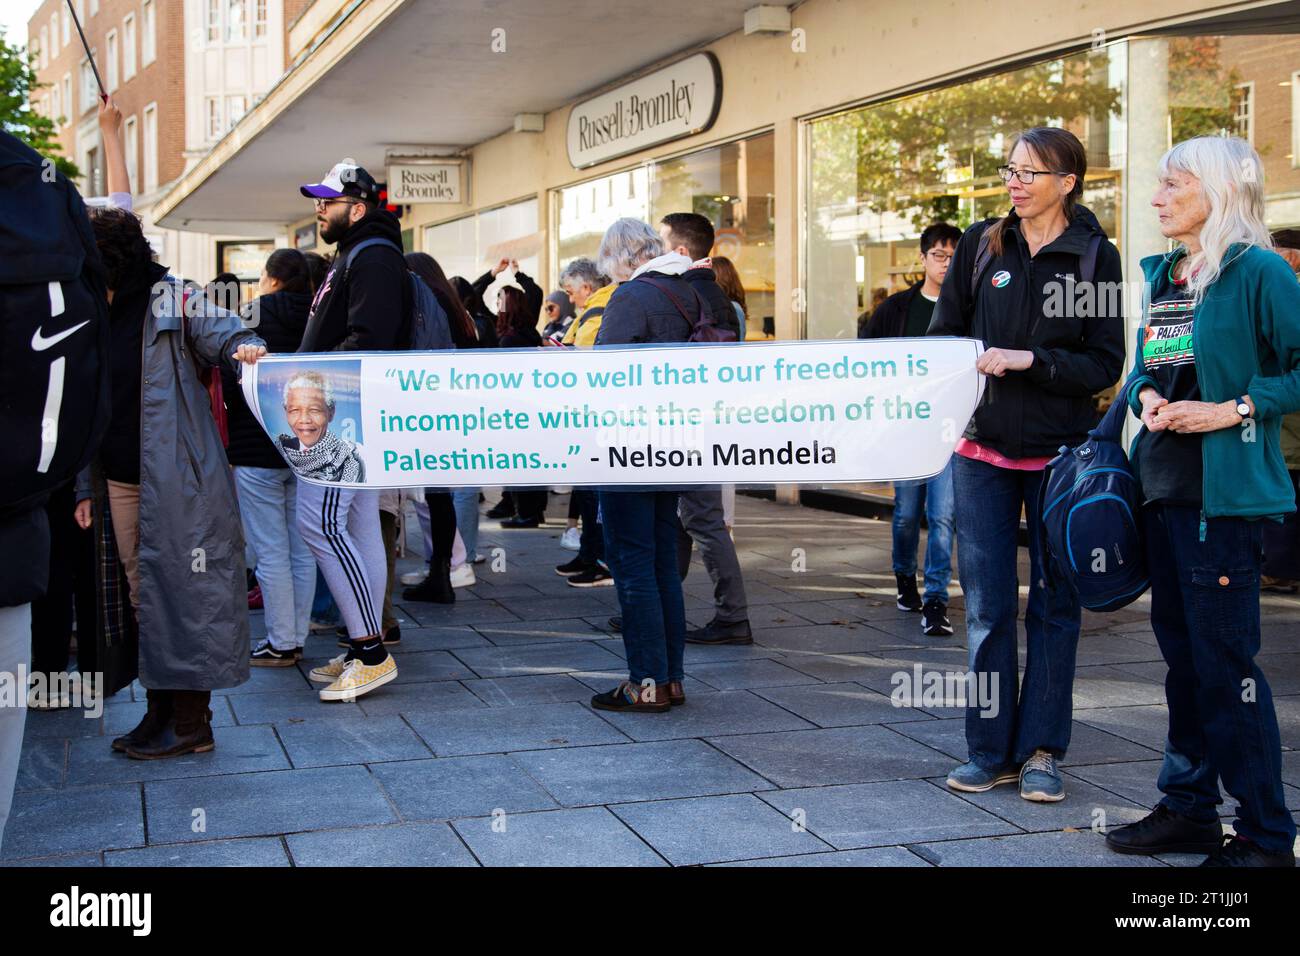 Free Palestine protest Exeter city centre - Nelson Mandela image and quote banner Stock Photo